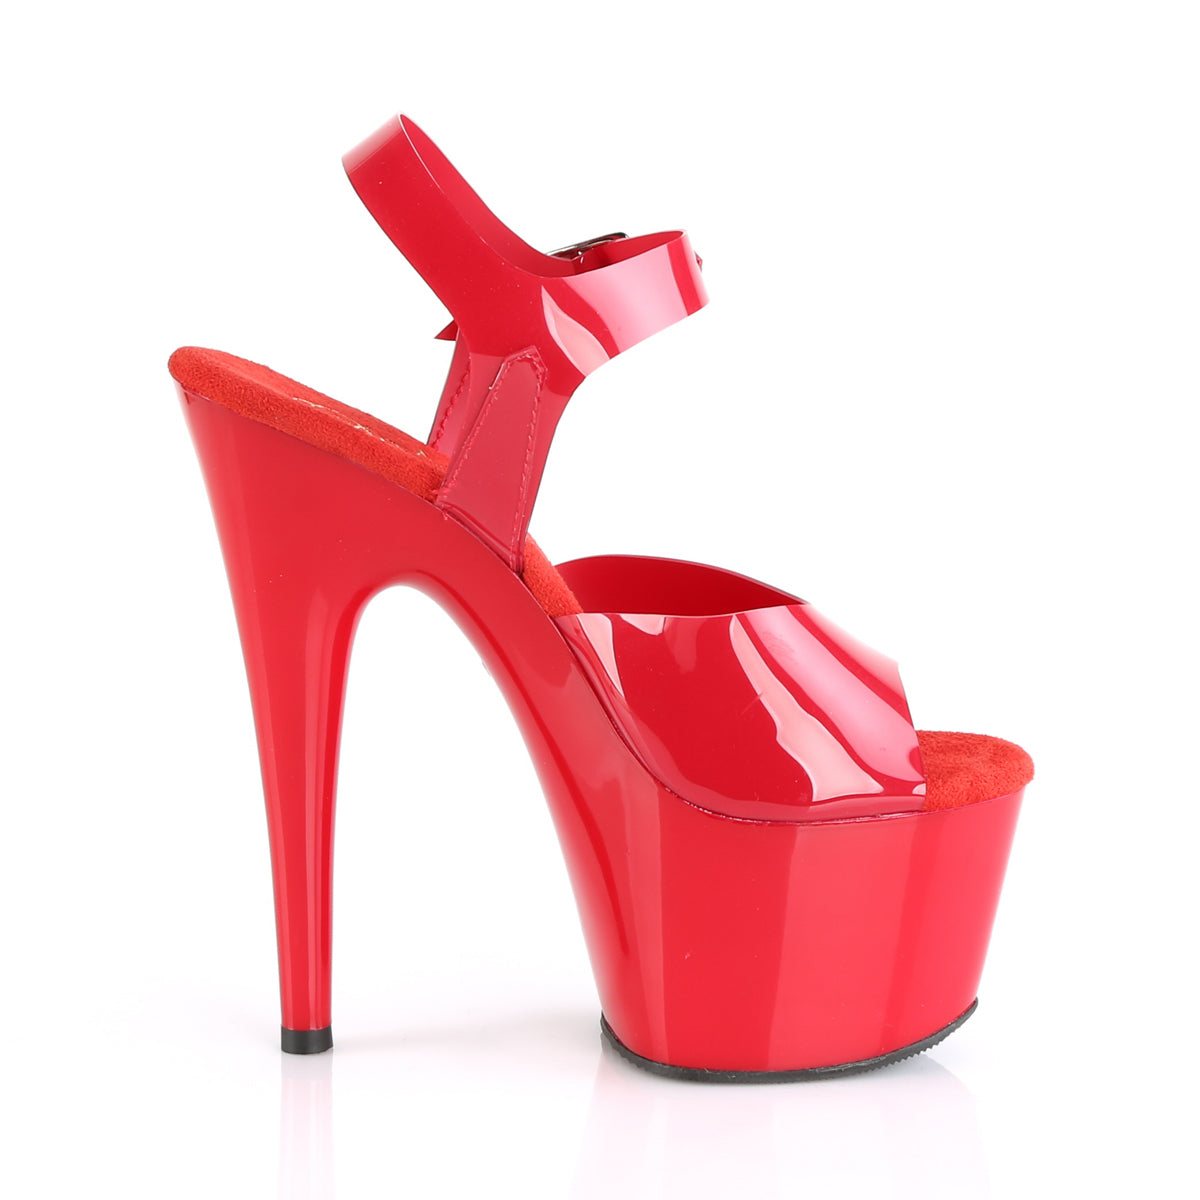 ADORE-708N/RTPU/M 7" PLEASER FAST DELIVERY 24-48h